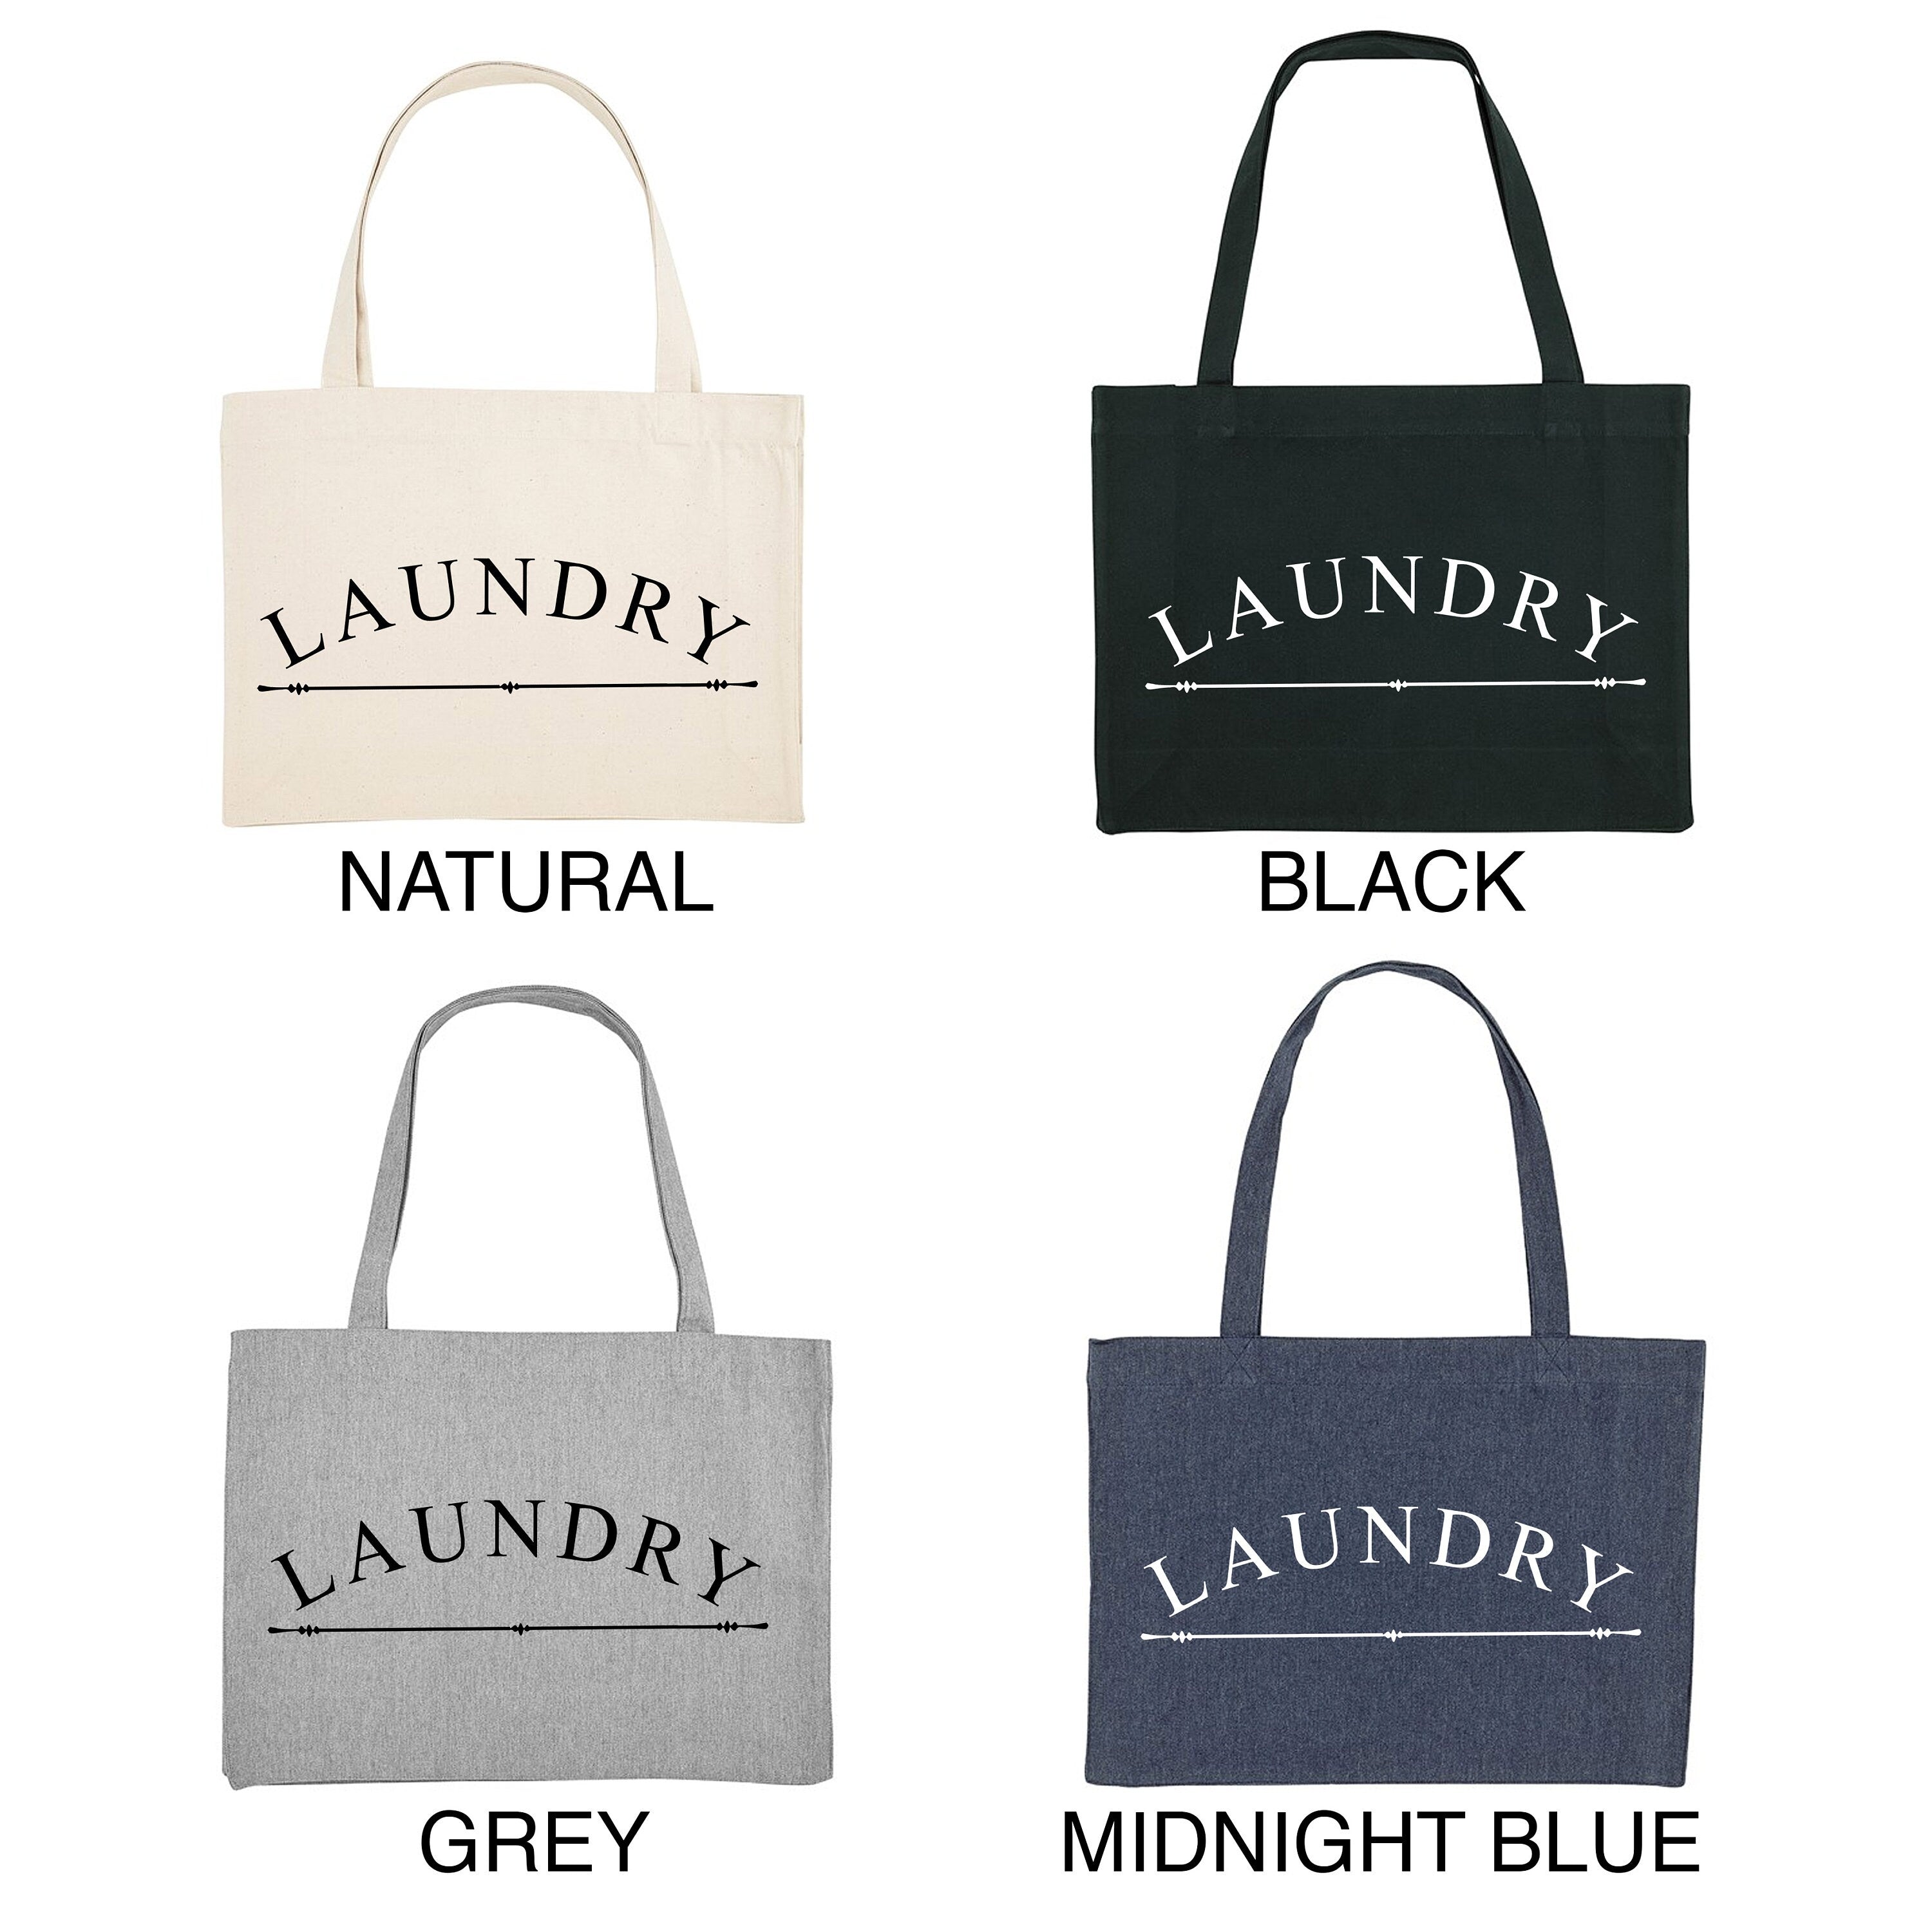 Home And Travel Laundry Bag, Laundry Storage Hamper, Large Carry Organise Tote, Dry cleaning, Hand washing, Delicates, Ironing